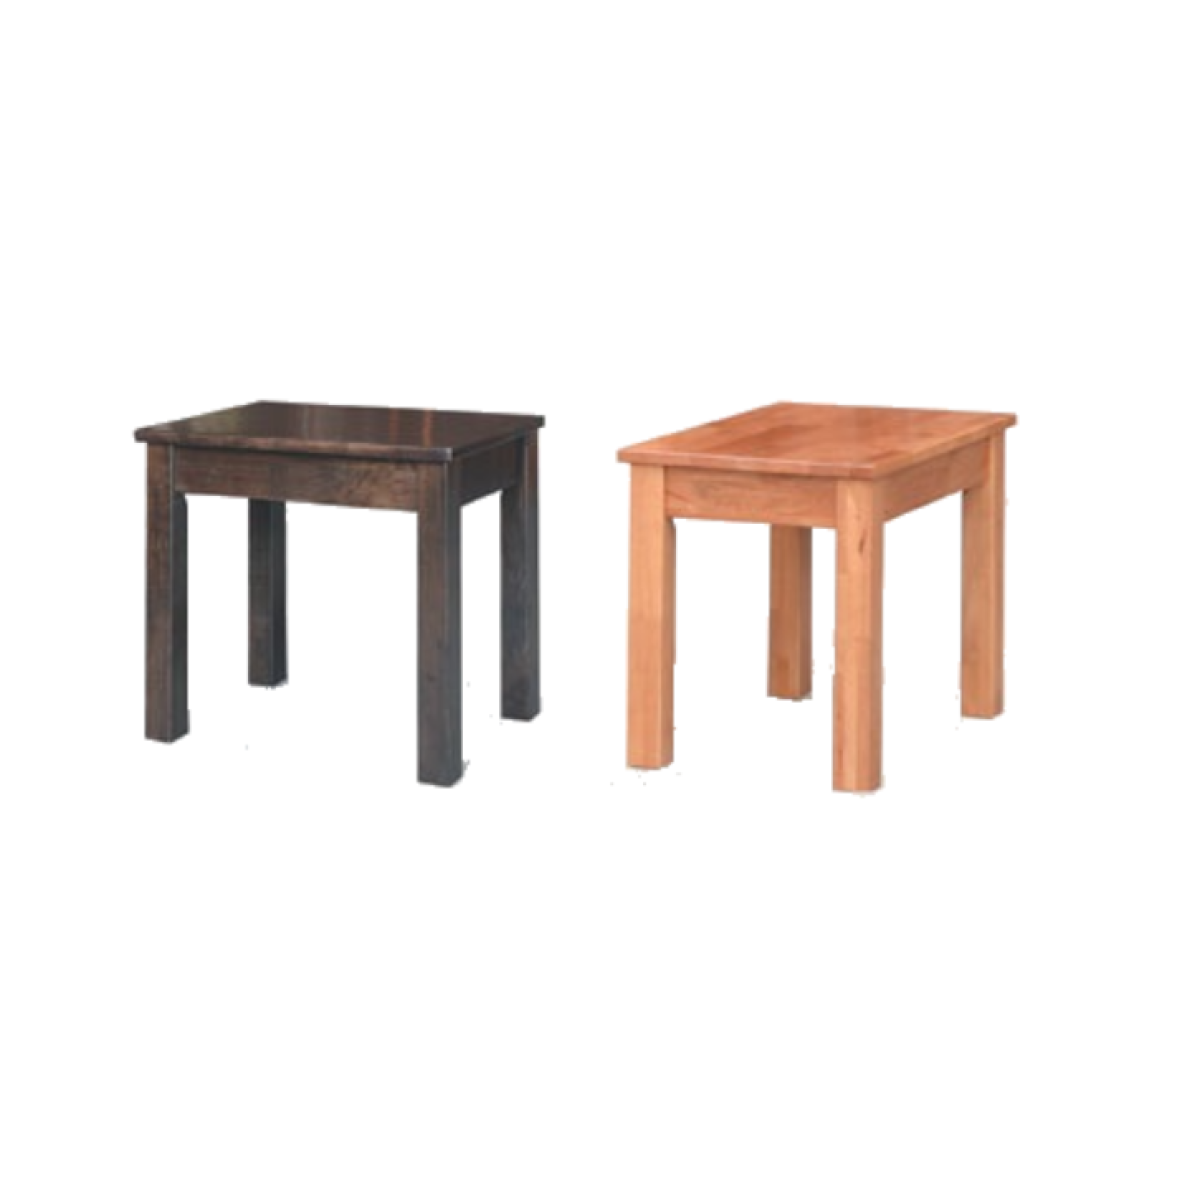 Benches & Stools